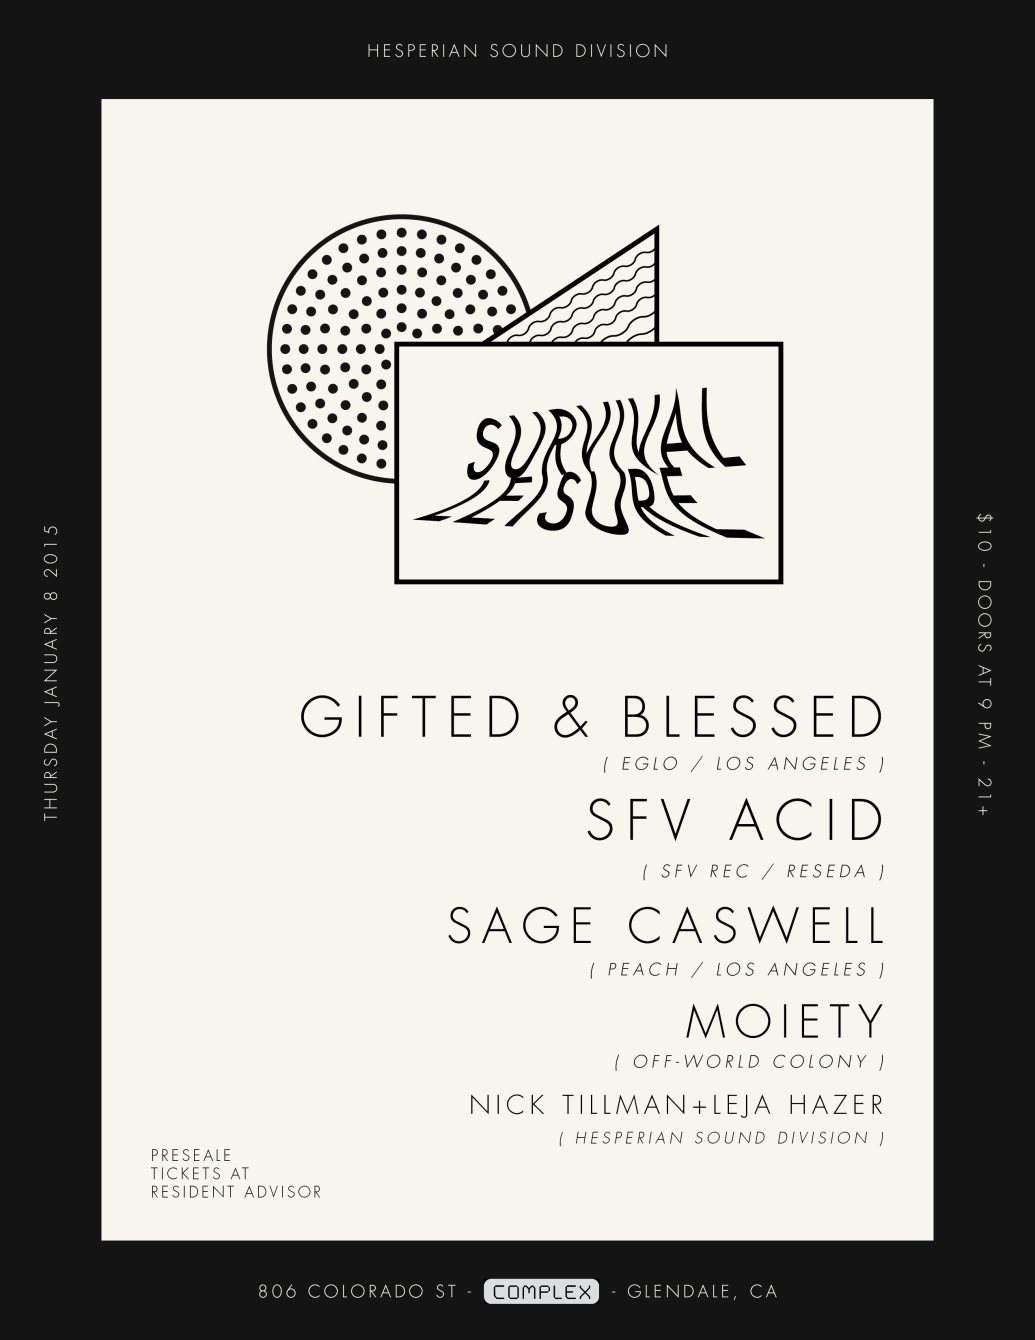 Survival Leisure with Gifted & Blessed, SFV Acid, Sage Caswell & More - フライヤー表